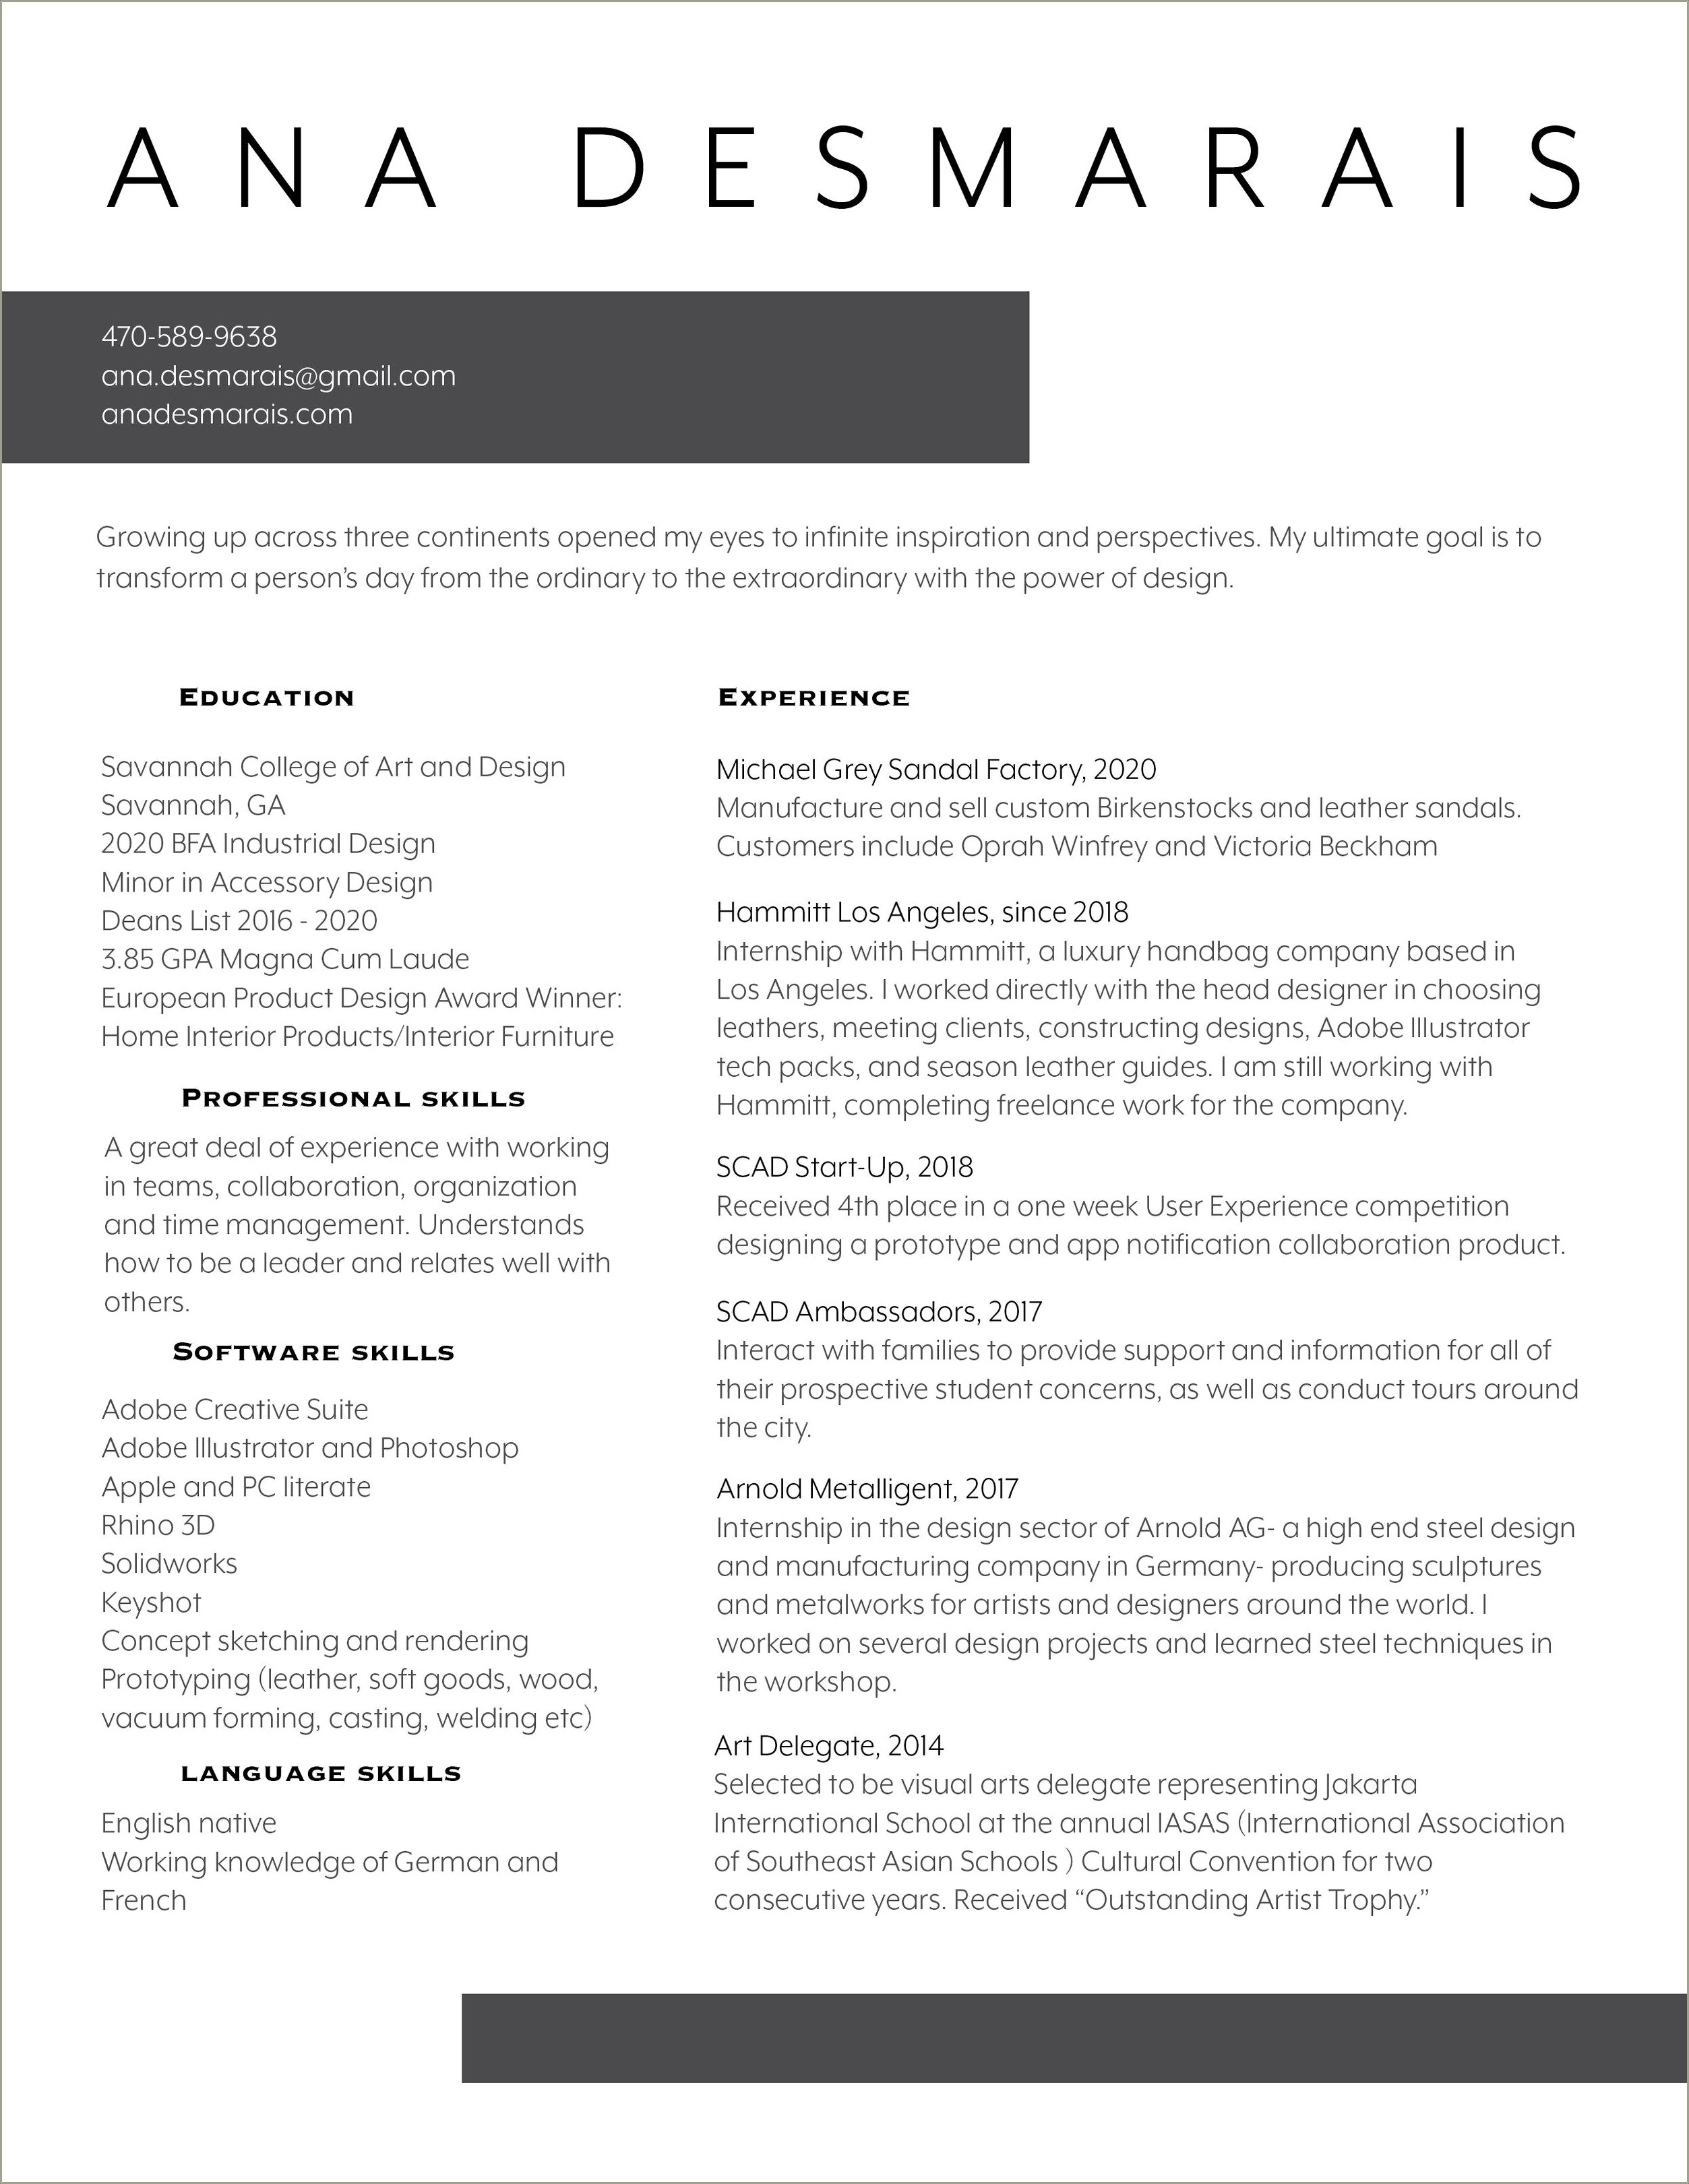 Working Knowledge Of A Language Resume